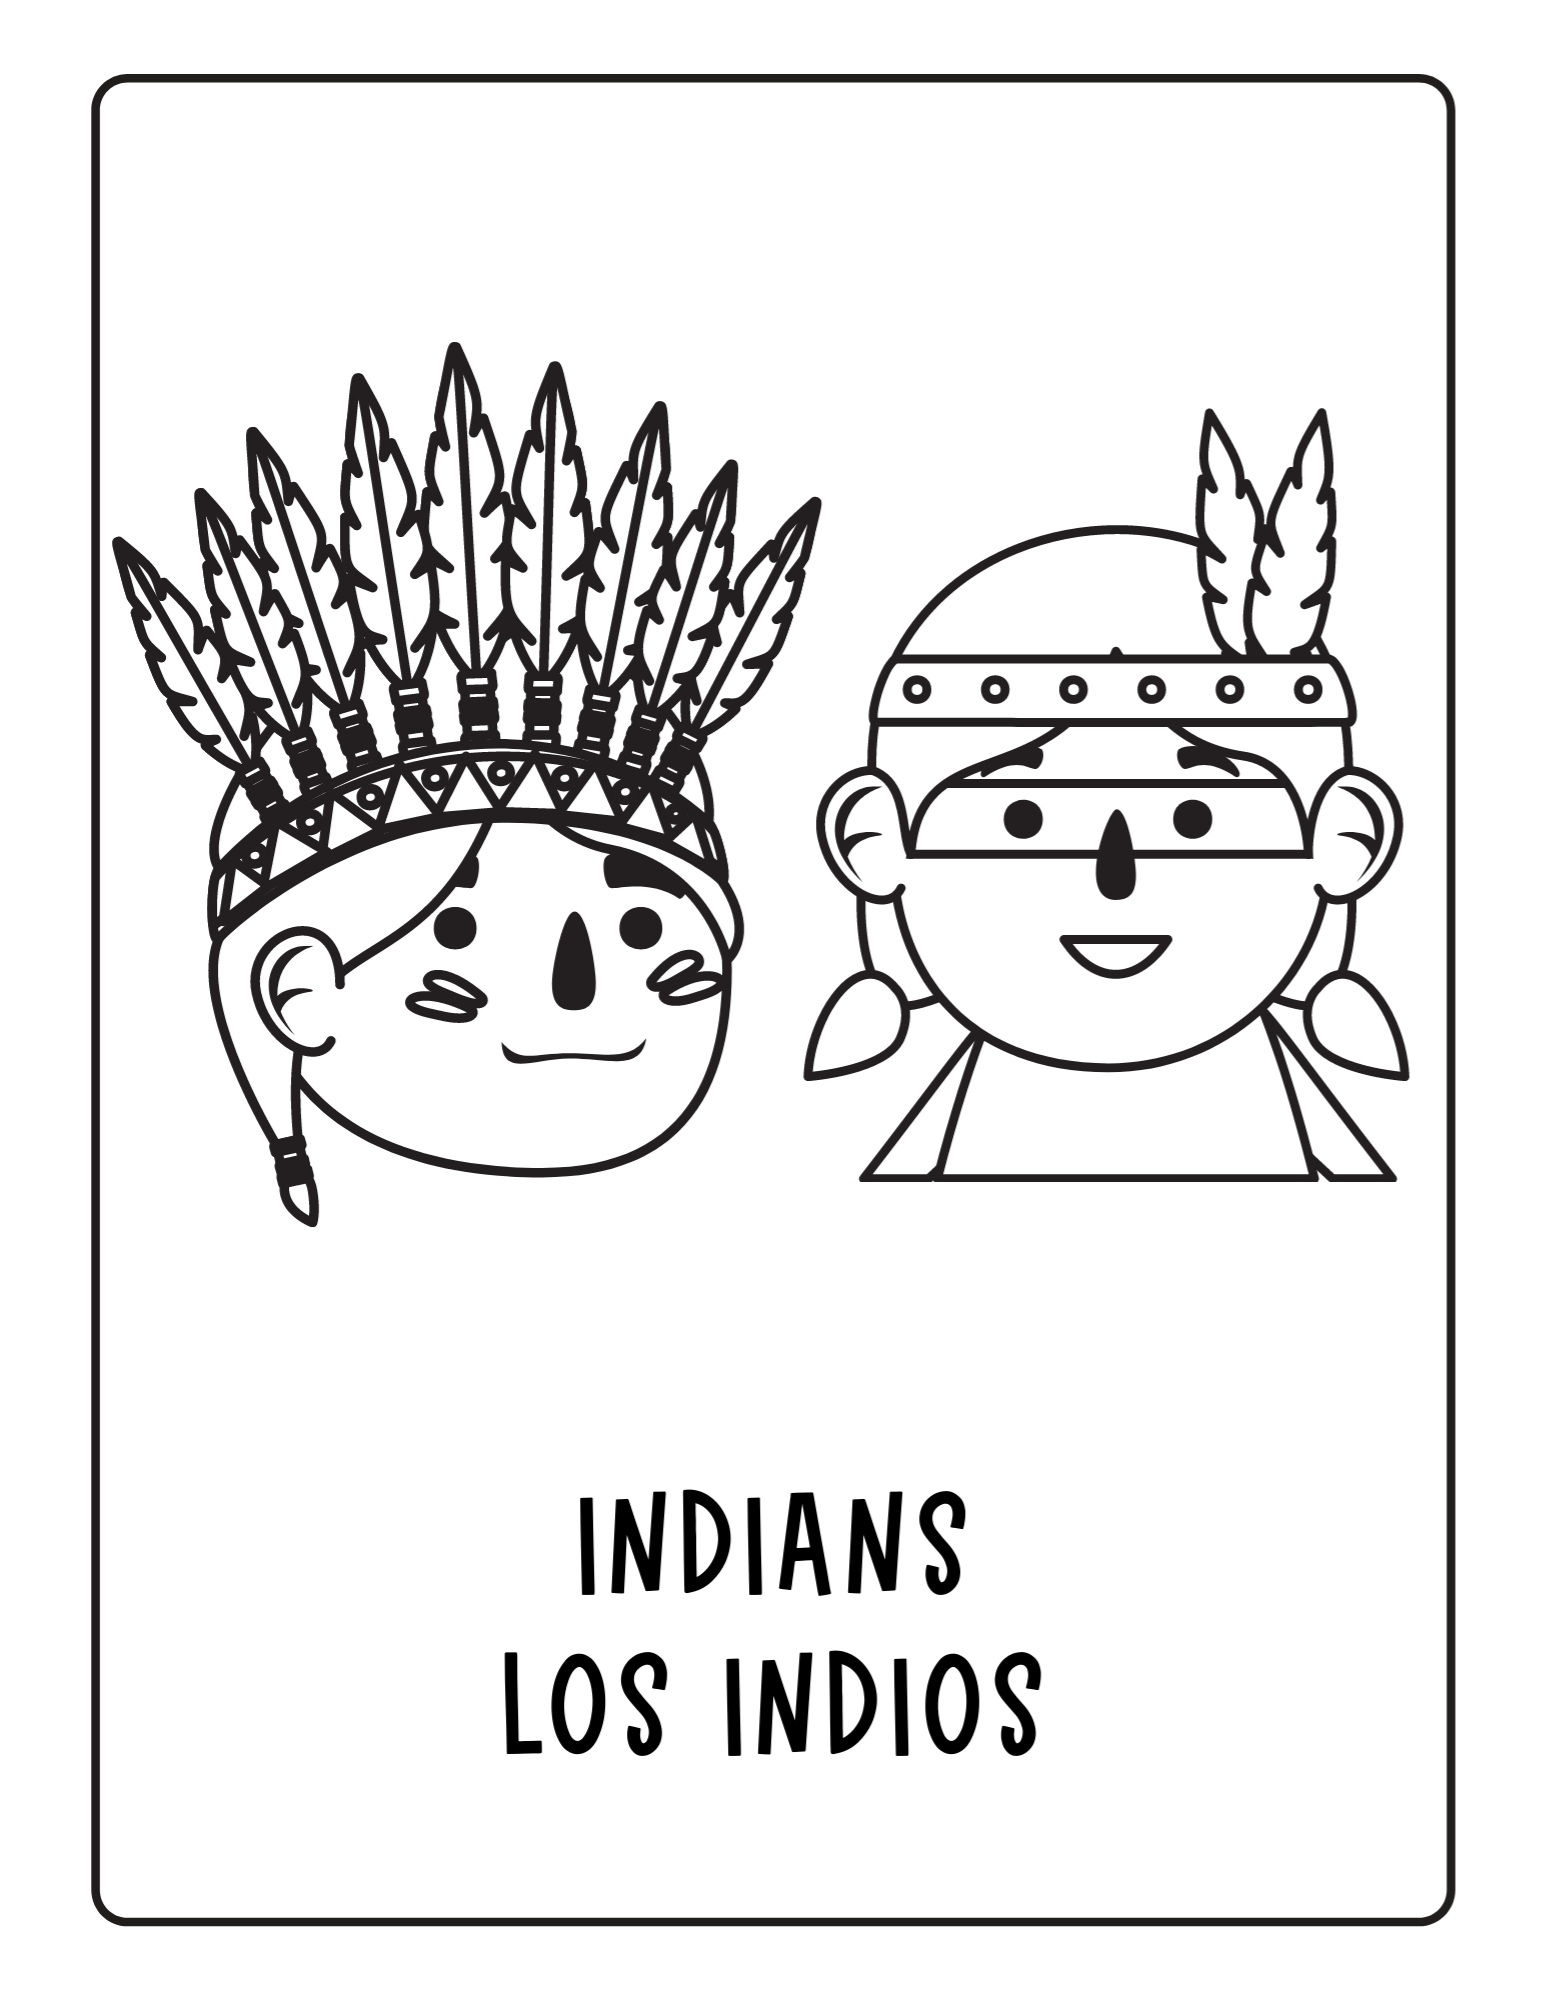 El otoão fall spanish and dual language coloring pages